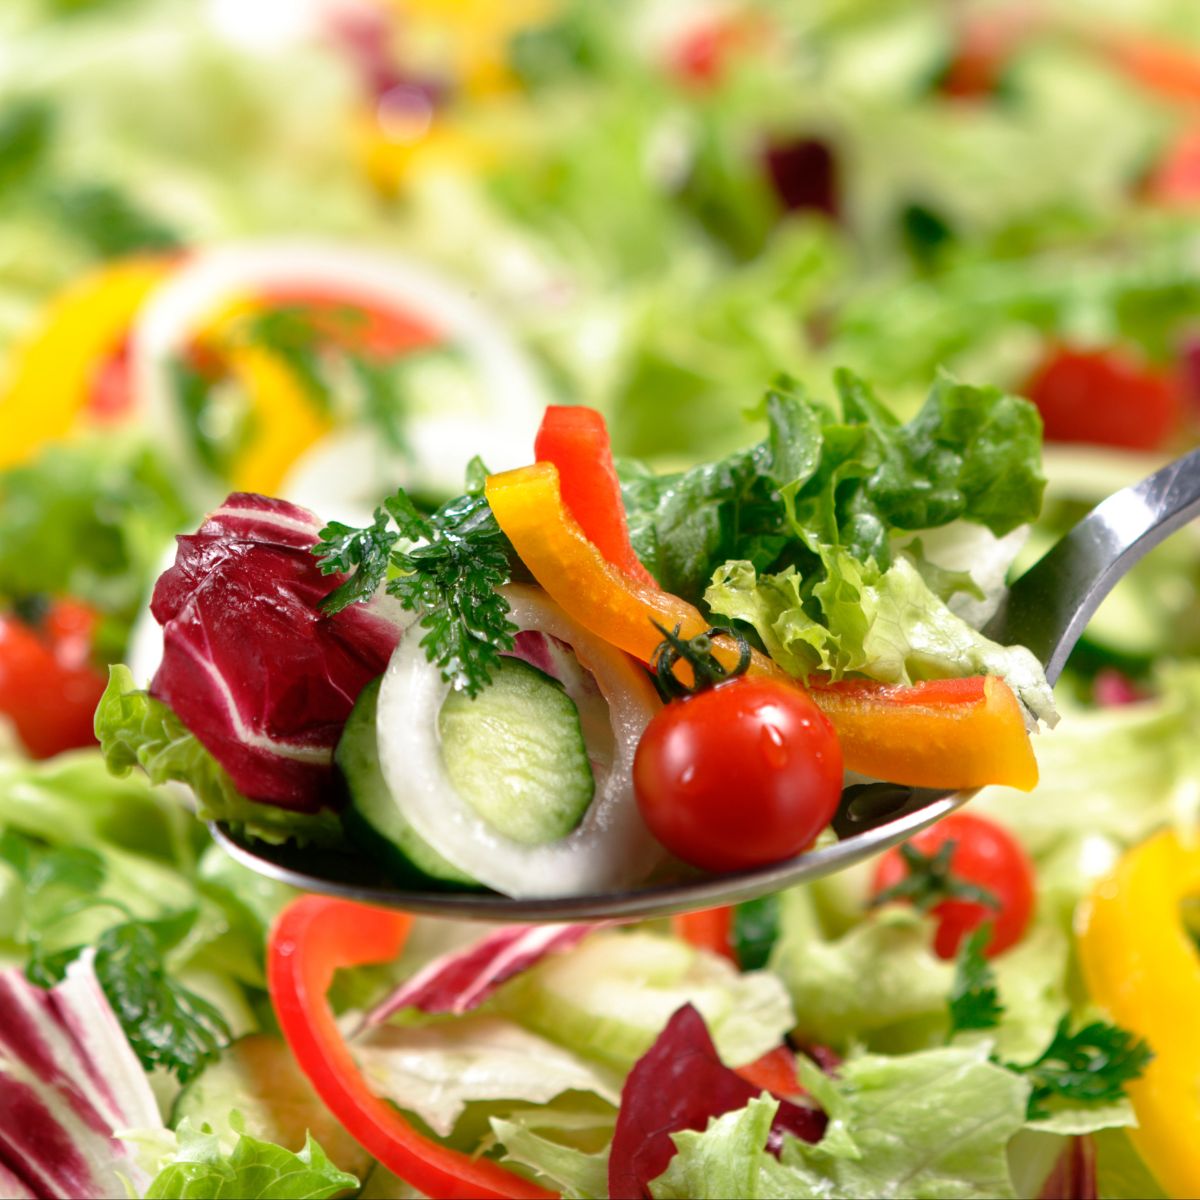 Fresh green salad with tomatoes, peppers, cucumbers, and more.